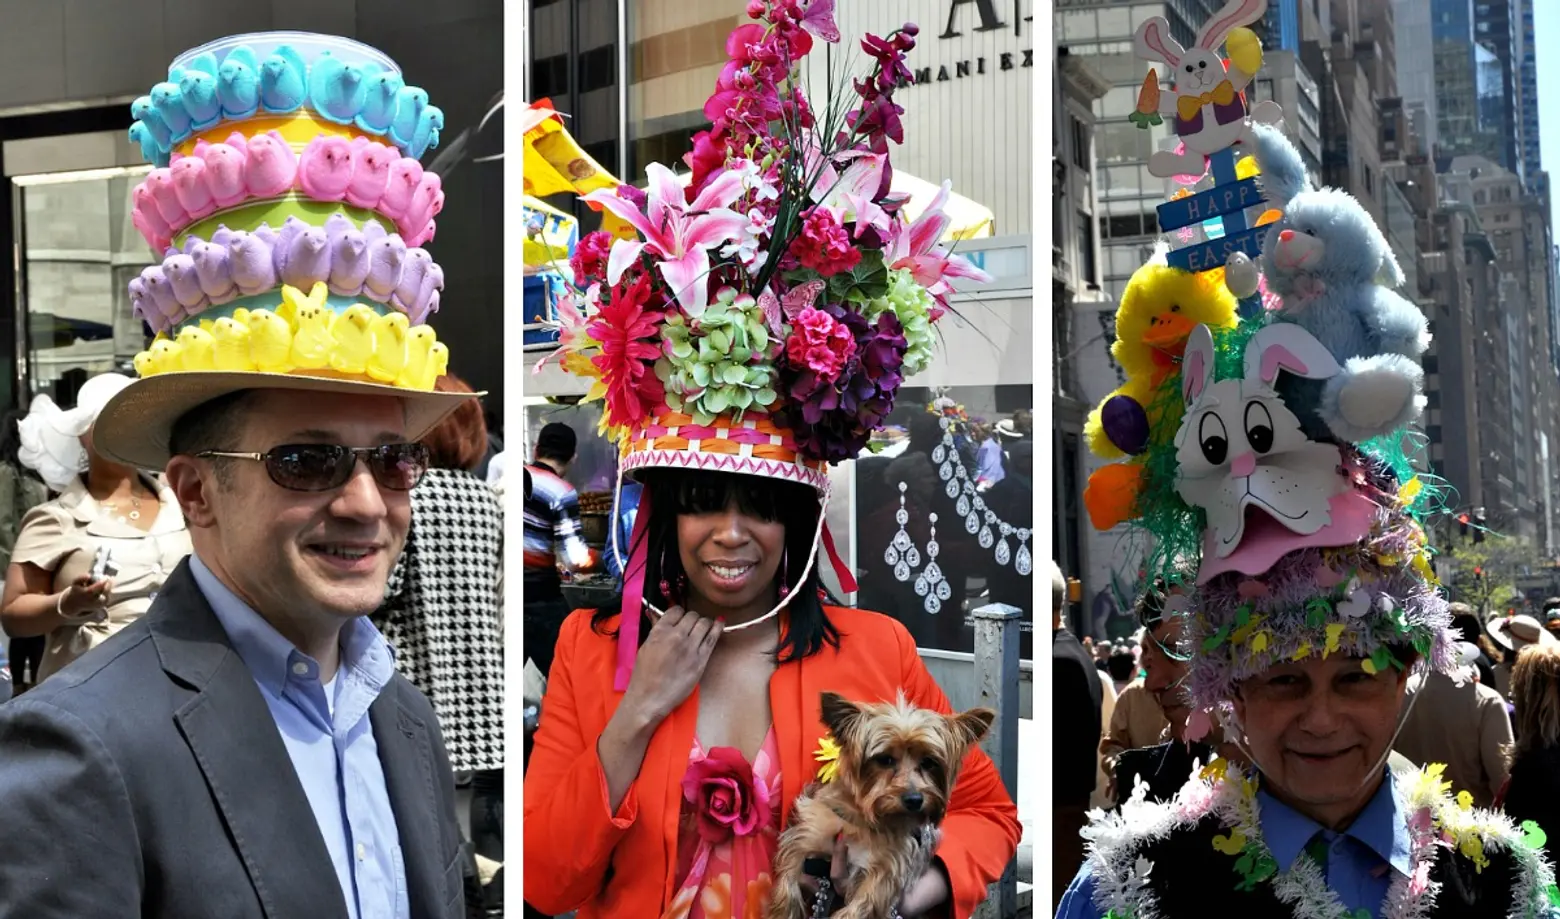 NYC Easter Parade, moder Easter bonnets